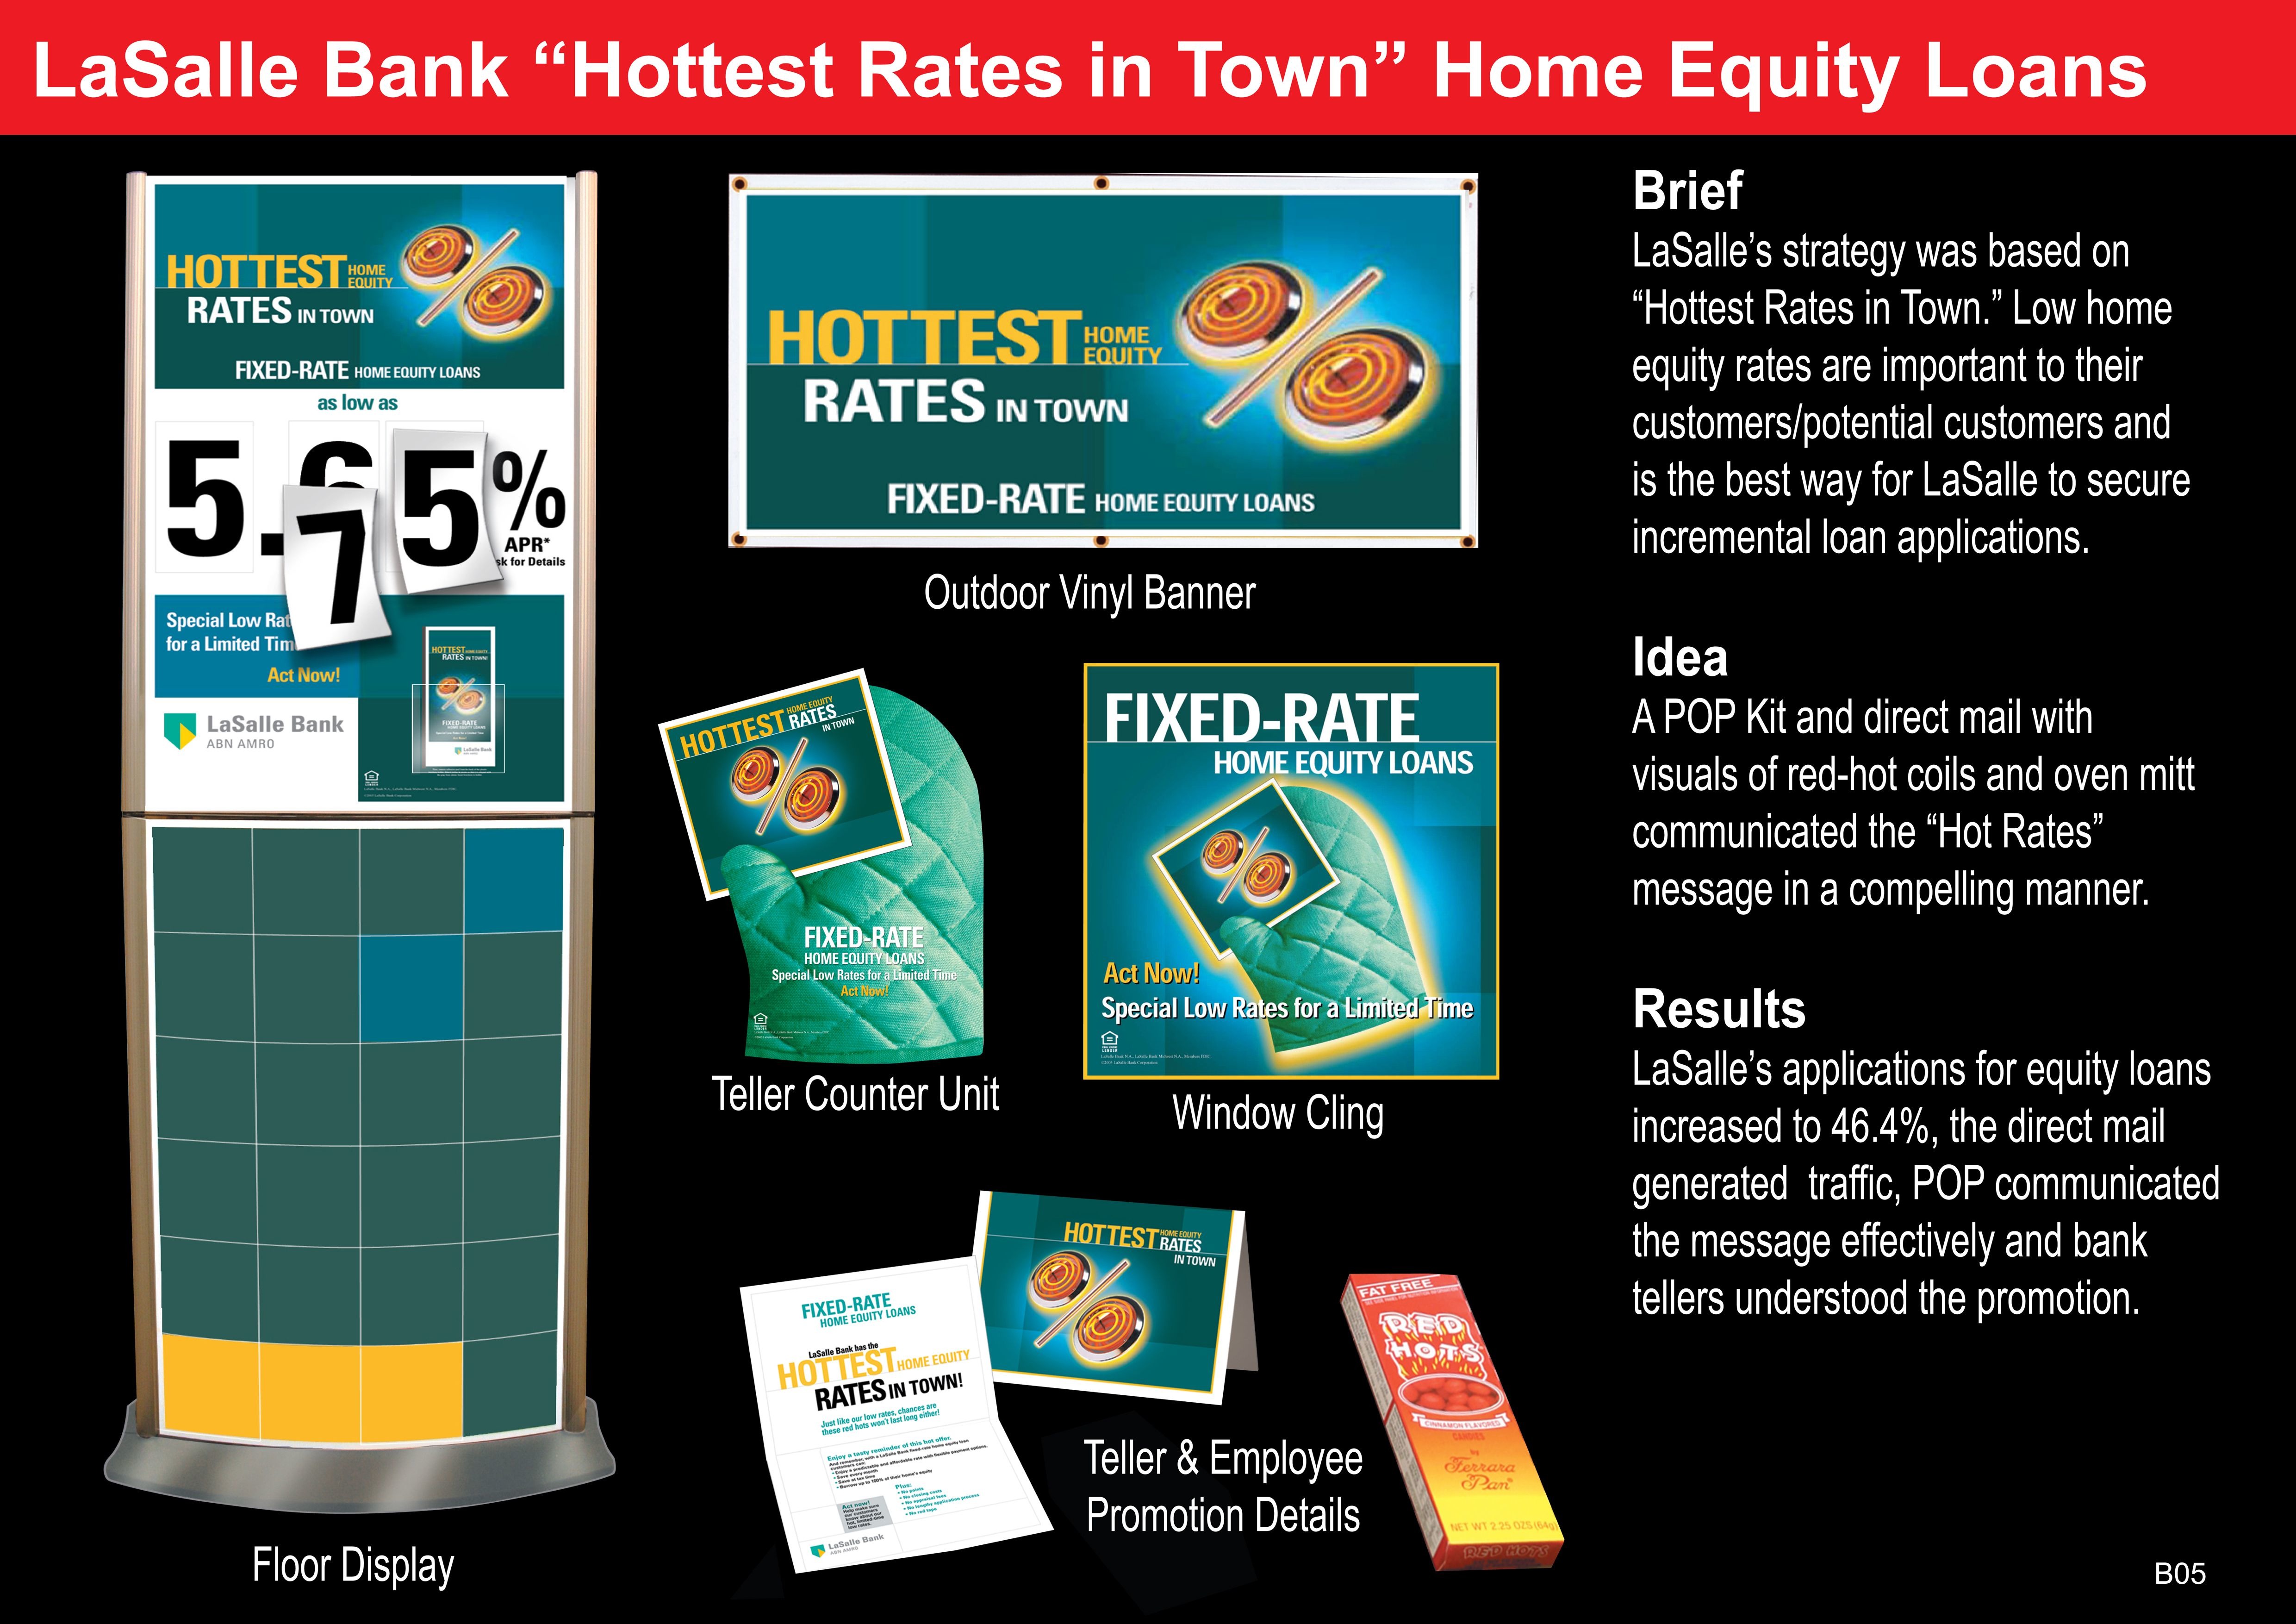 HOME EQUITY LOANS